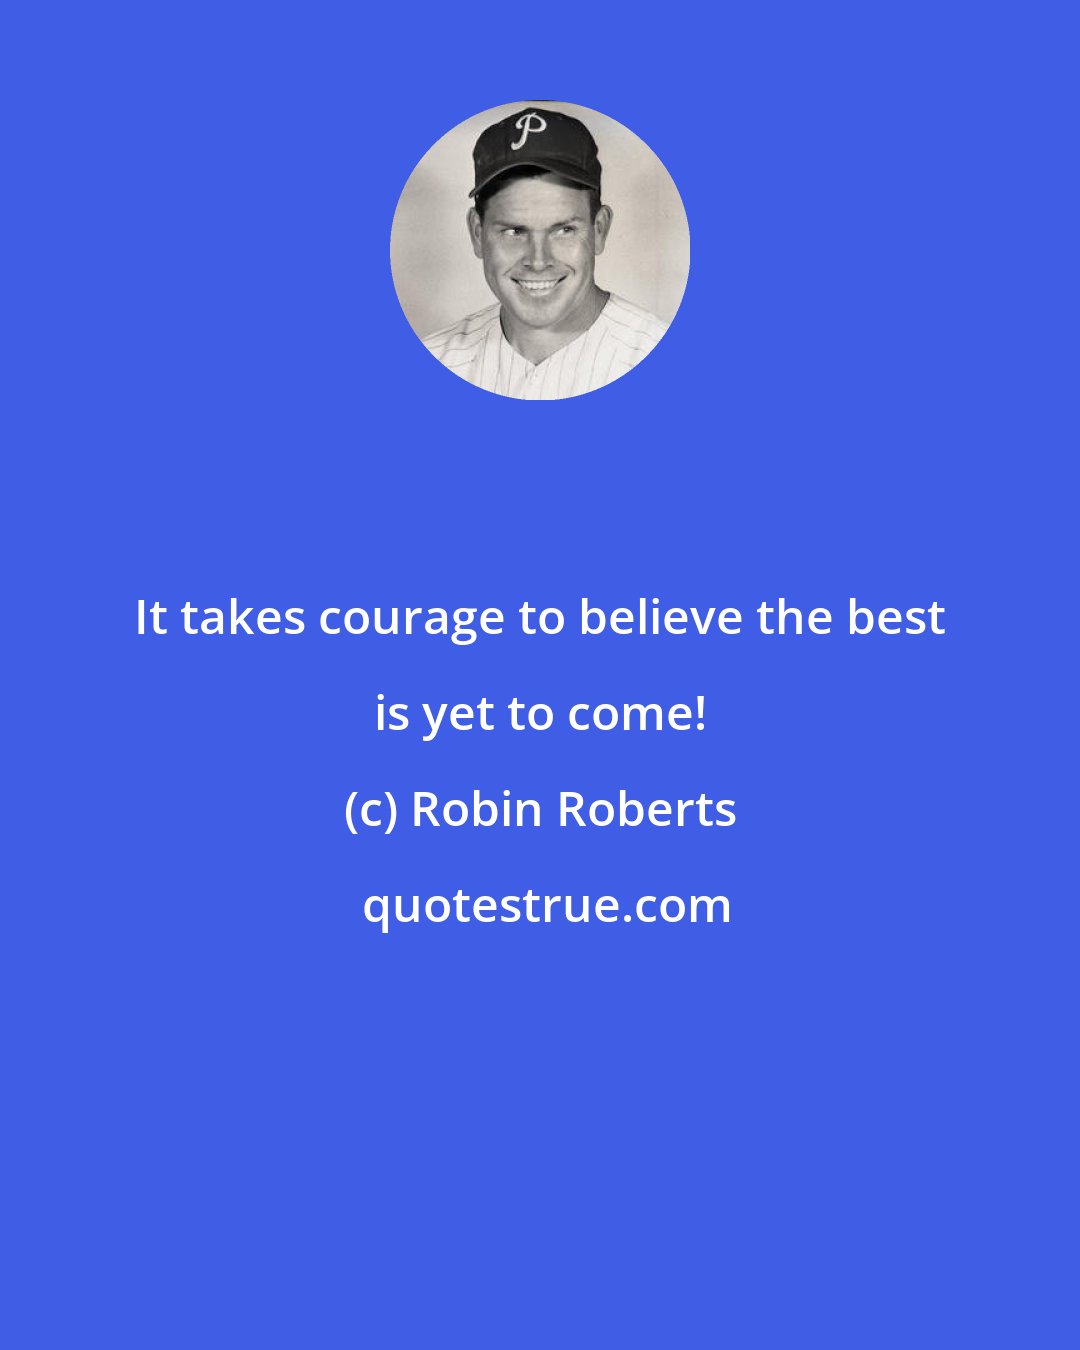 Robin Roberts: It takes courage to believe the best is yet to come!